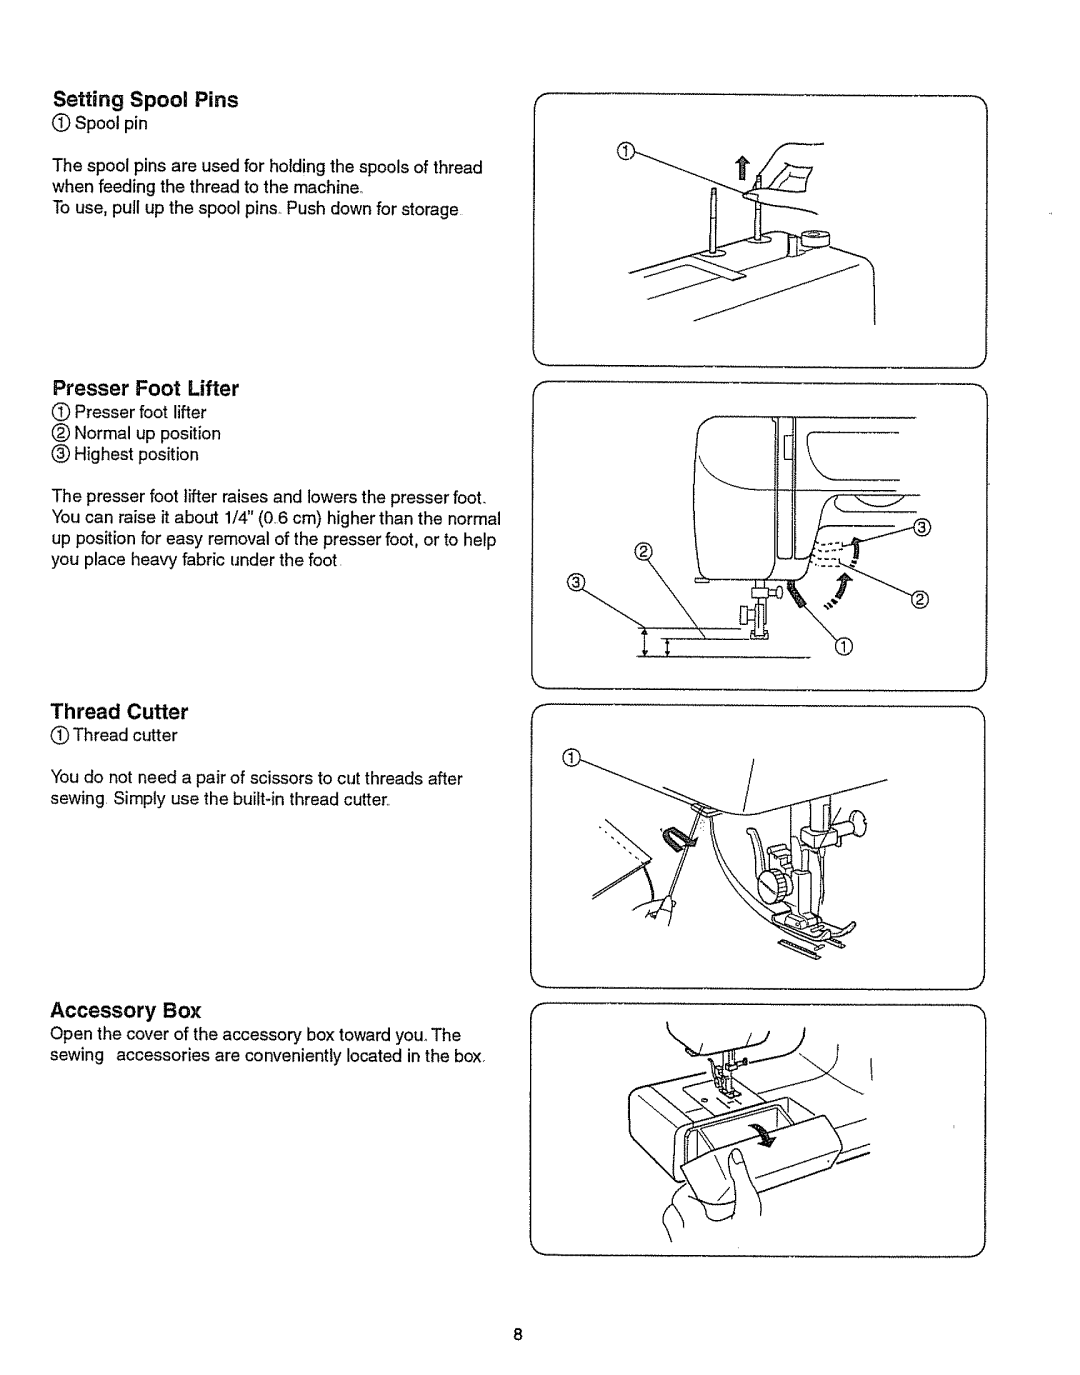 Kenmore 385.151082 owner manual Presser Foot Lifter, Thread Cutter, Setting Spool Pins, Accessory Box 